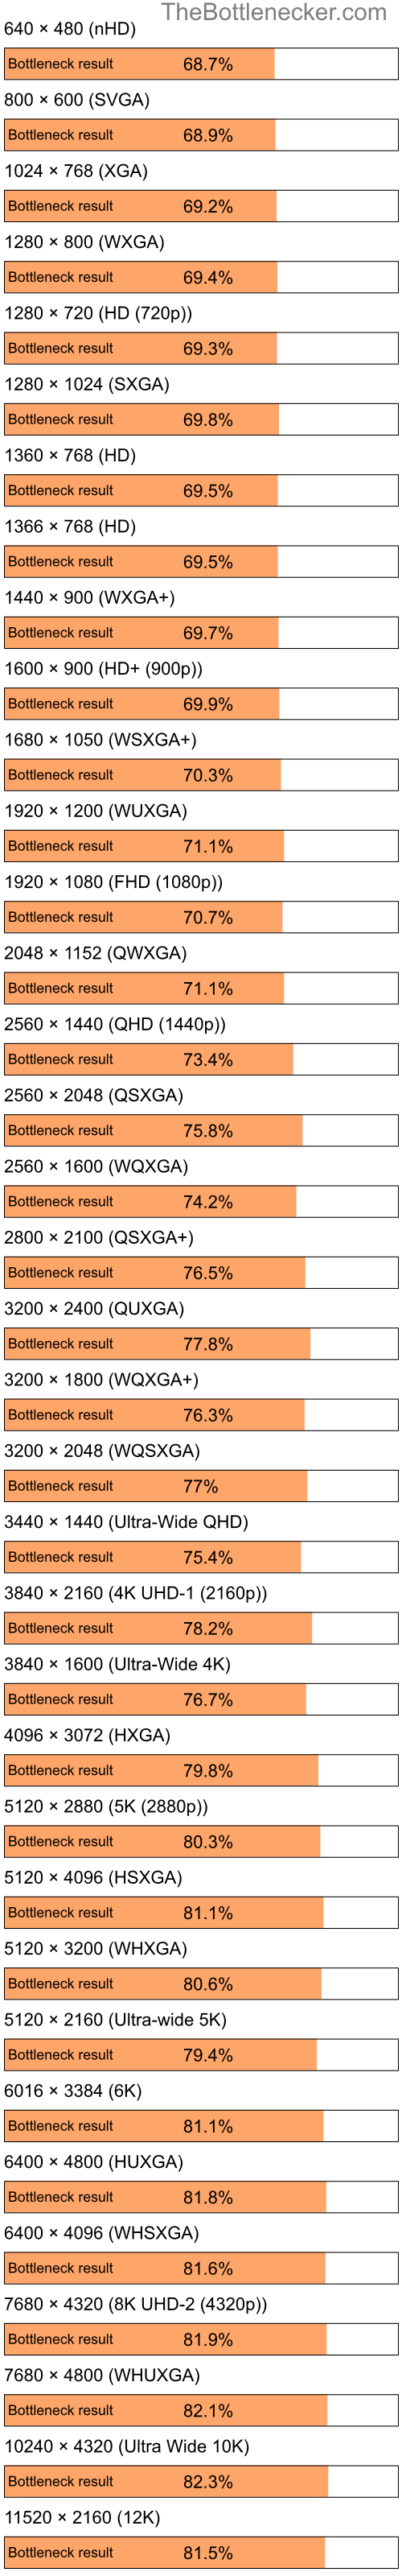 Bottleneck results by resolution for Intel Atom N280 and NVIDIA Quadro FX 350M in Processor Intense Tasks